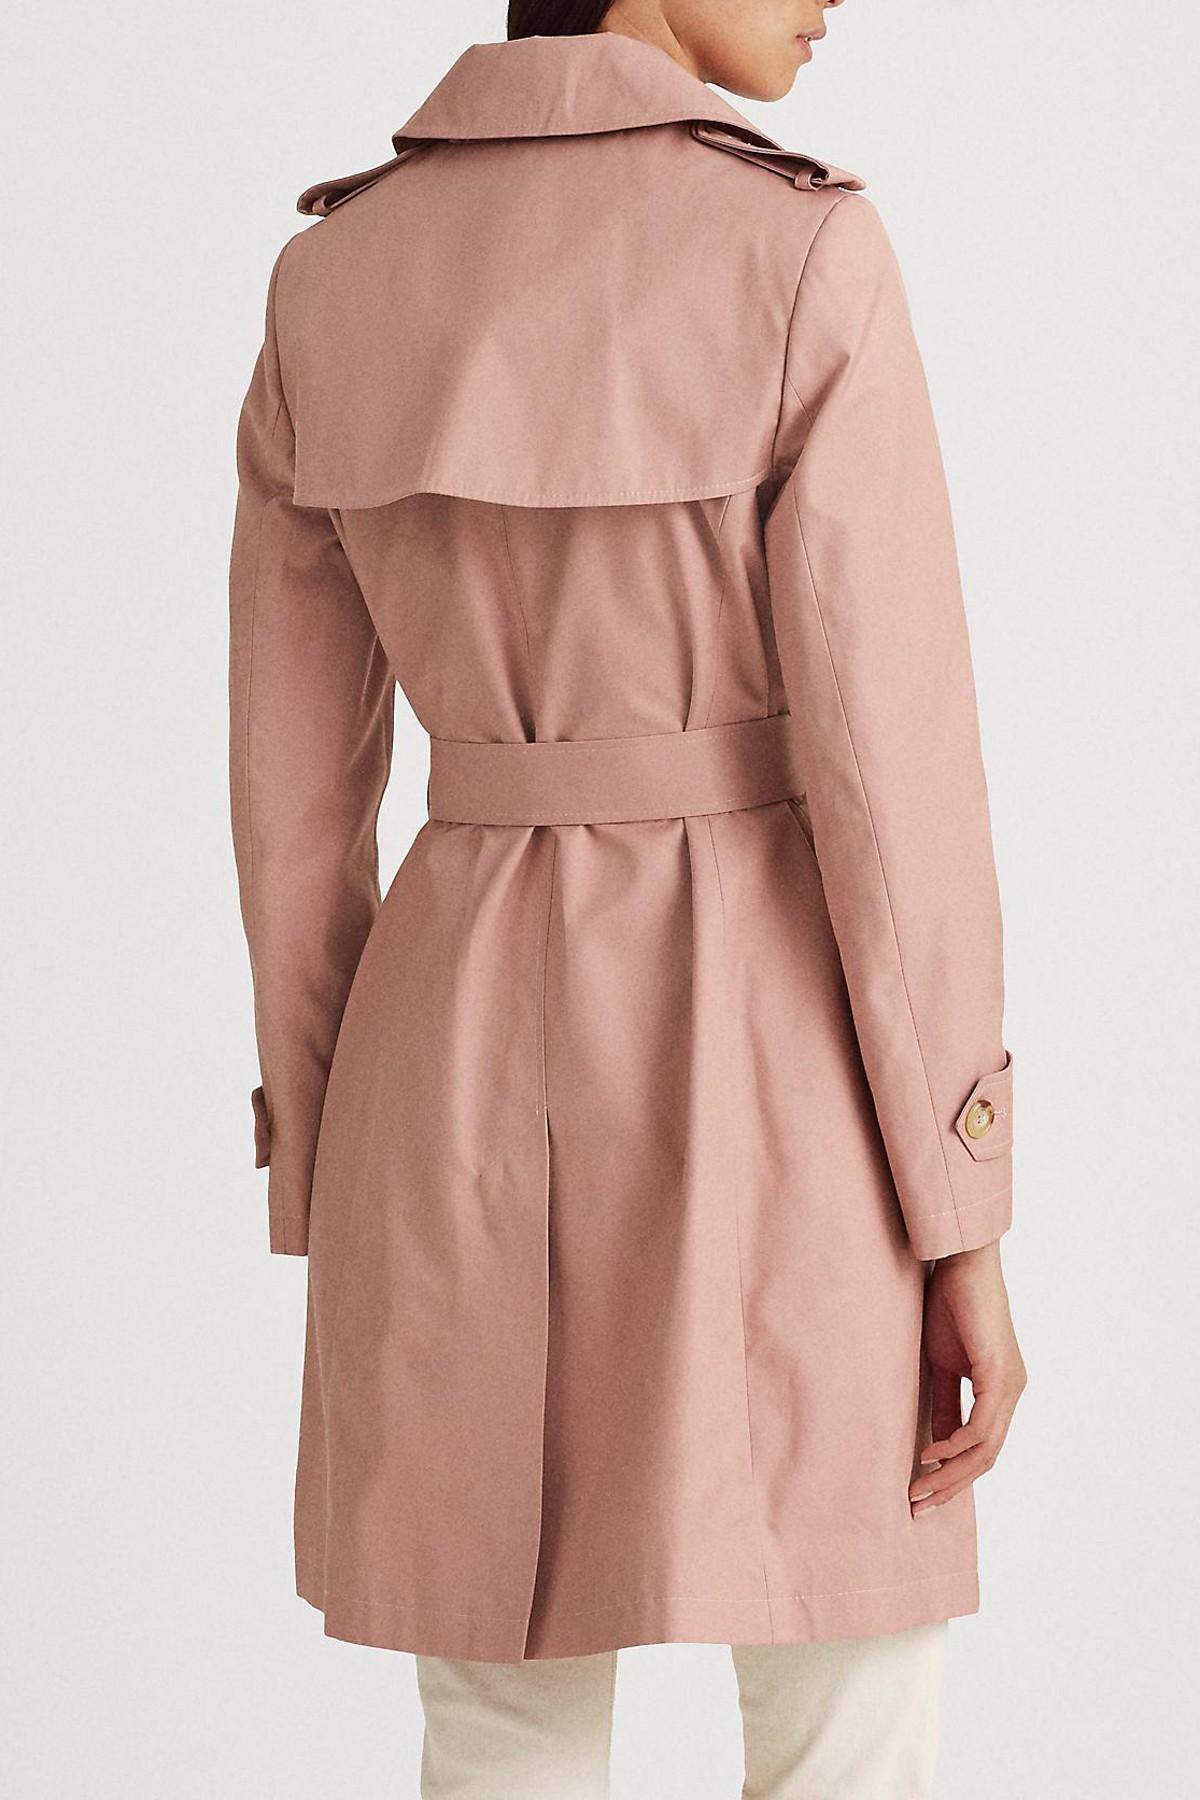 LOVERS + FRIENDS Pink Wrap Belted Short Trench Coat Size Small